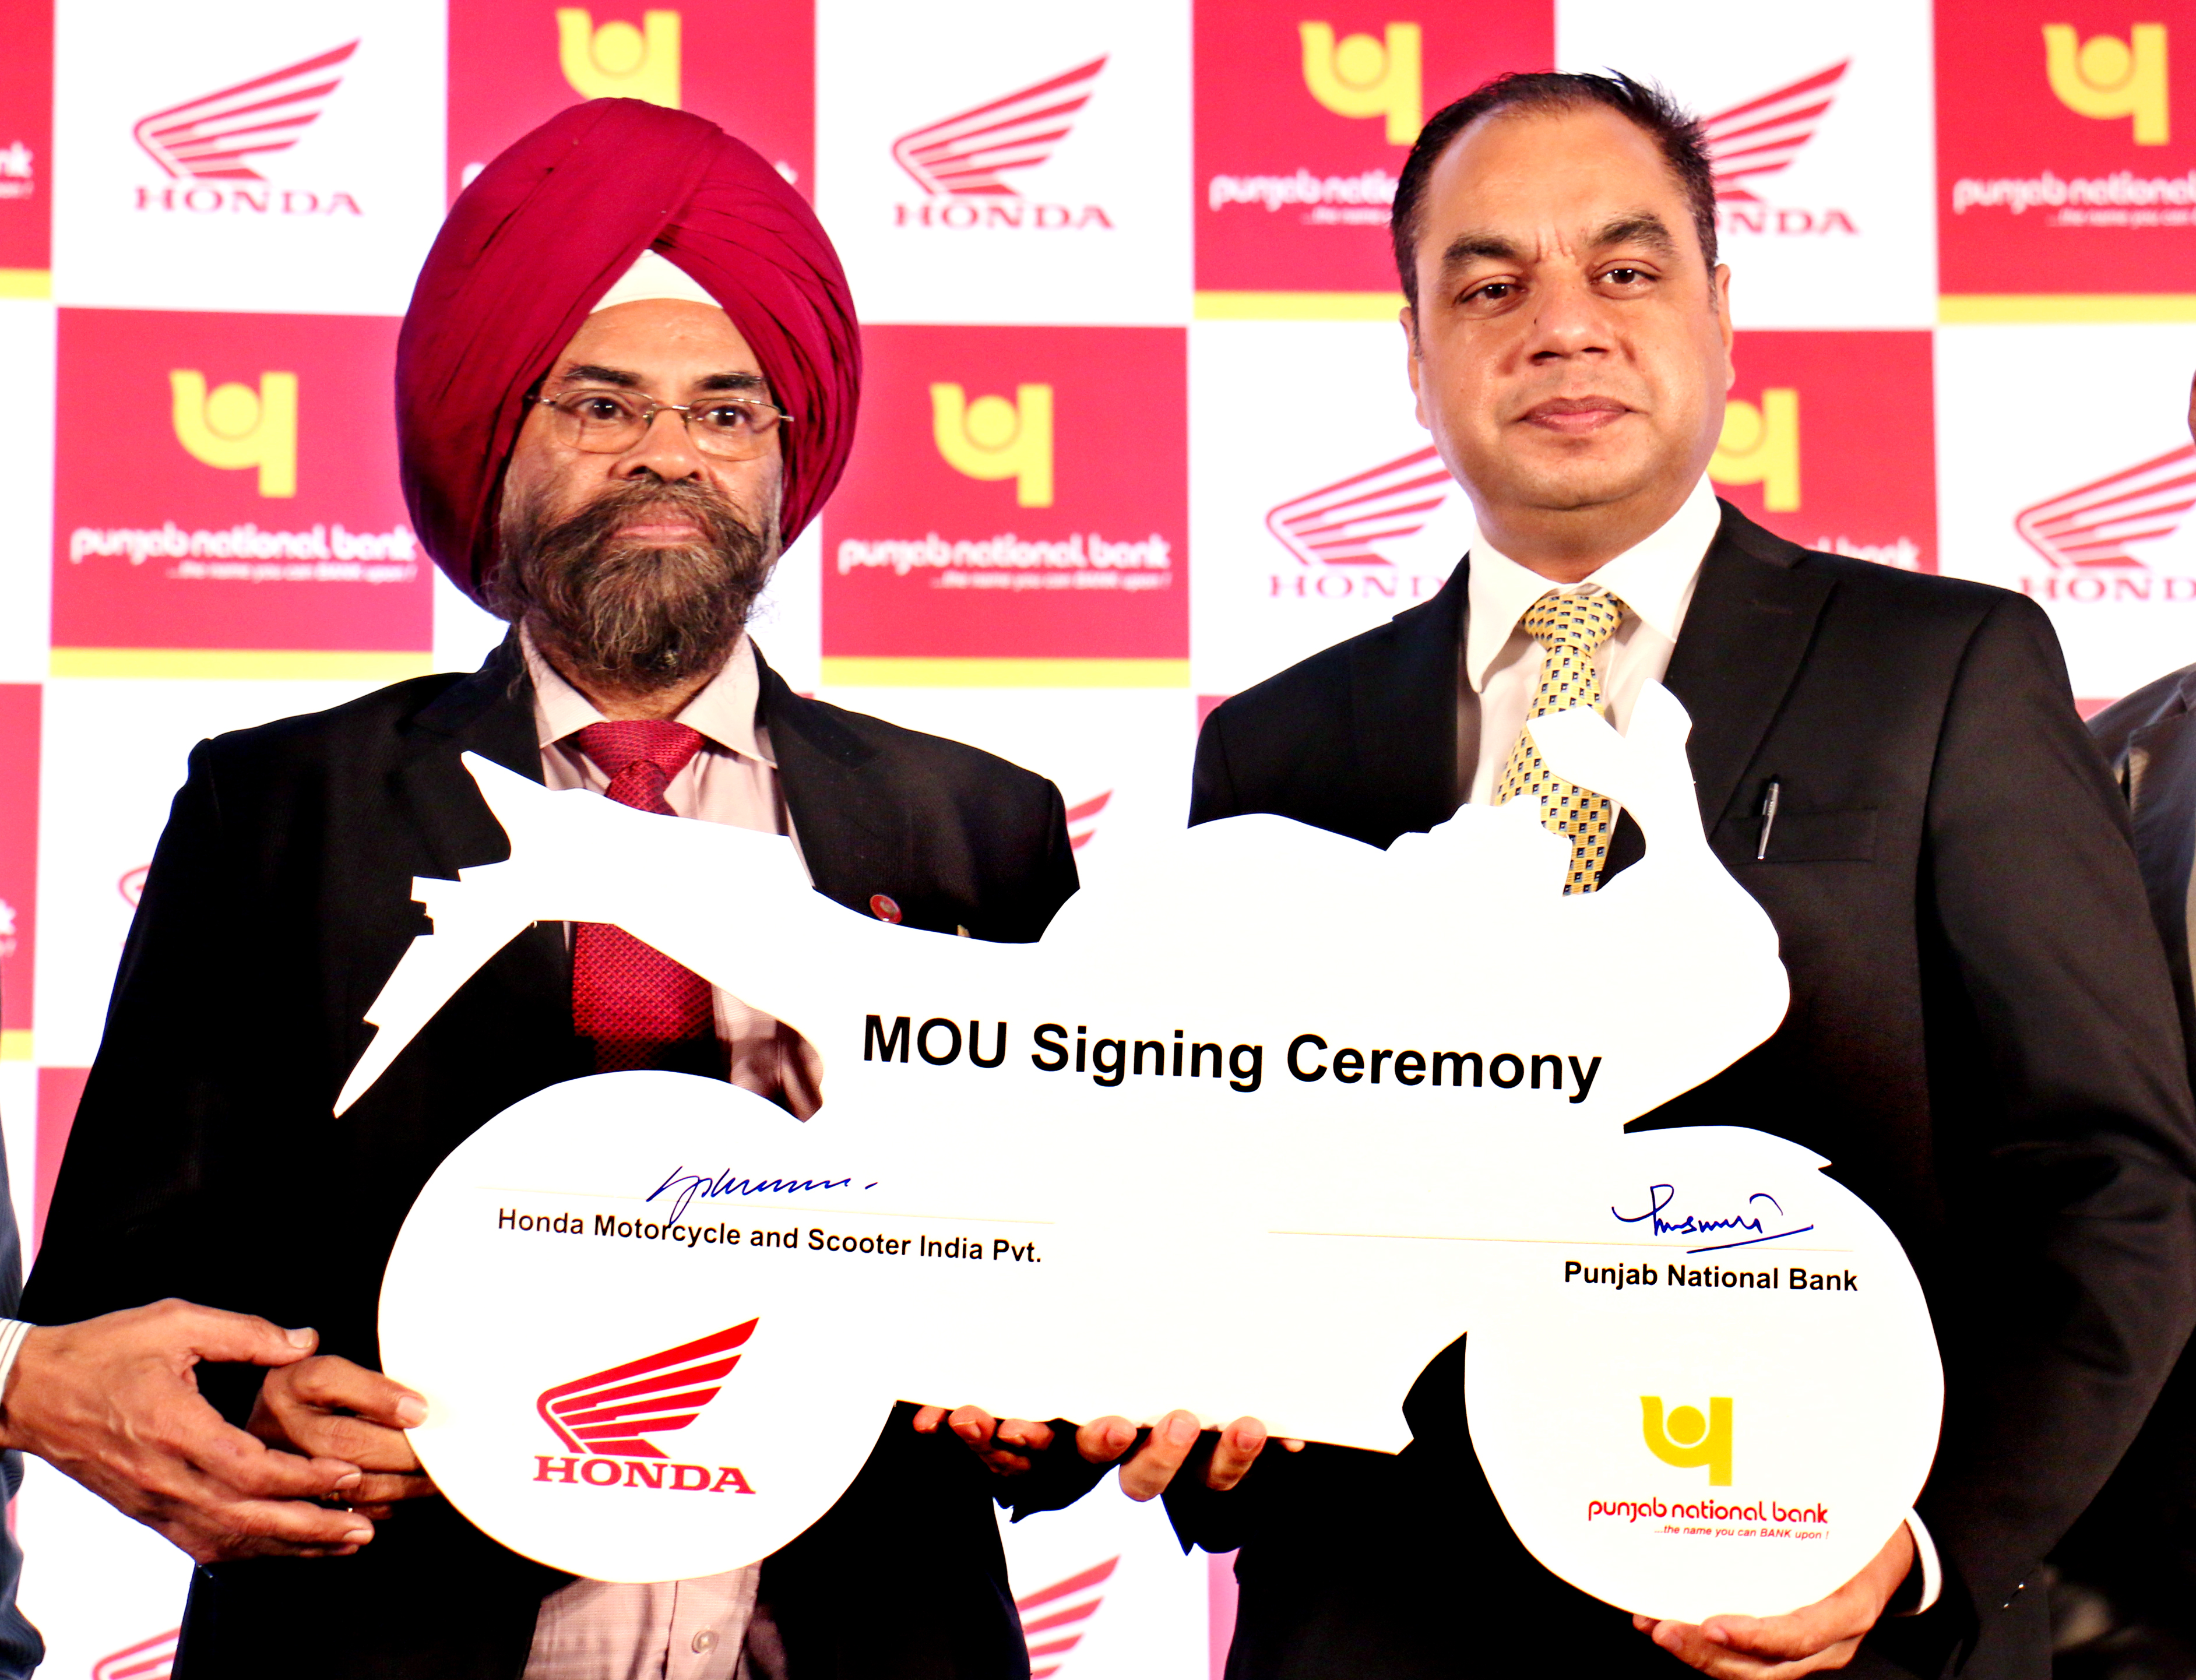 PNB and Honda Motorcycle come together in Retail Finance